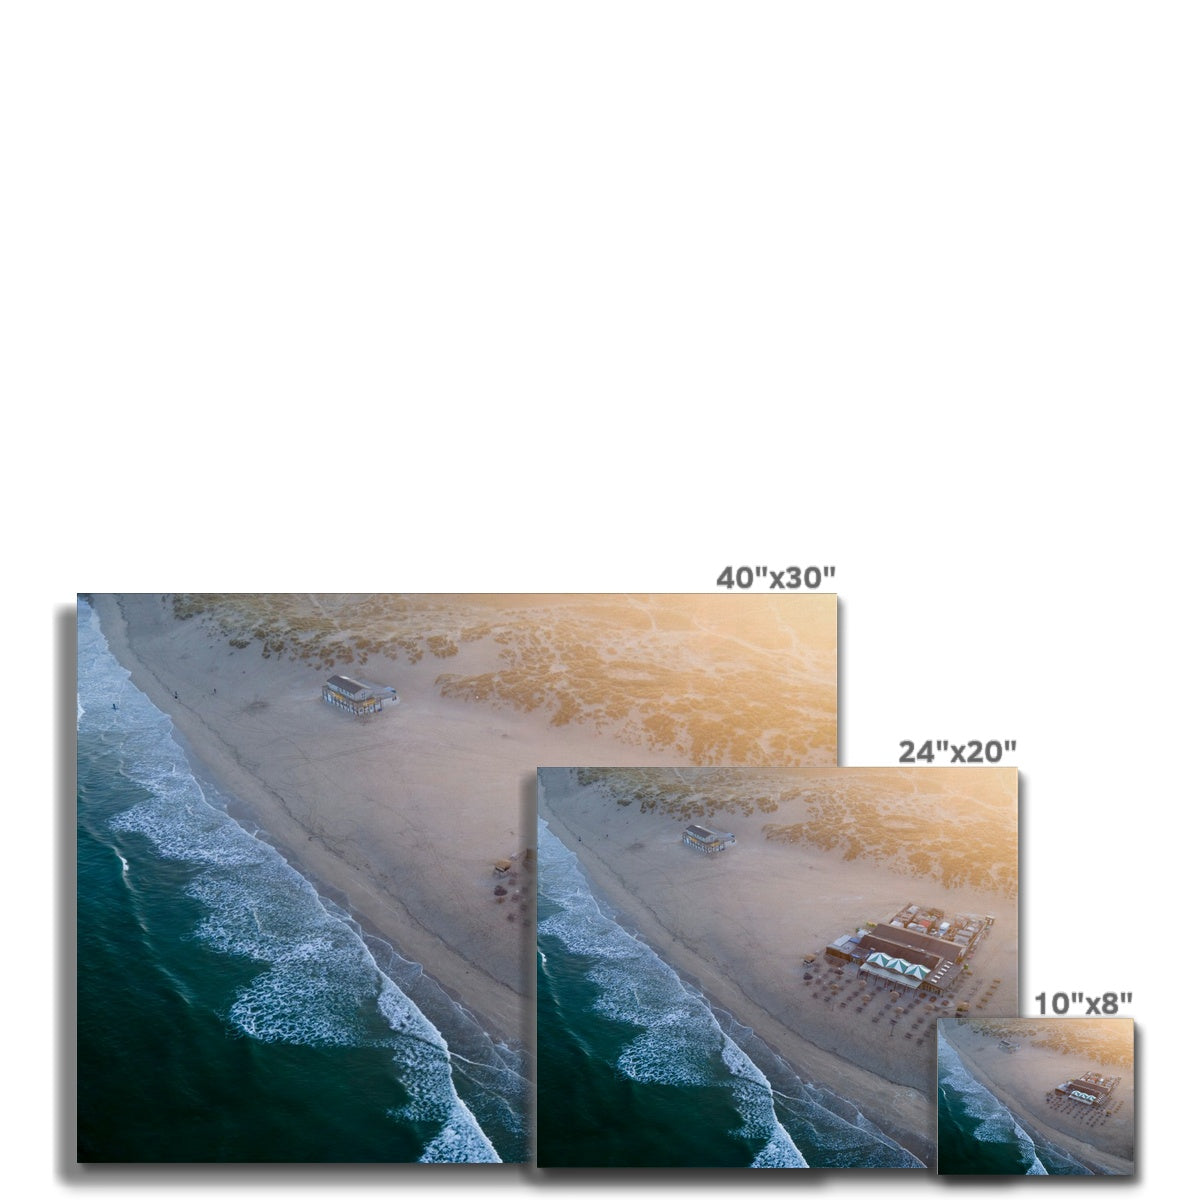 dawn watering hole canvas sizes